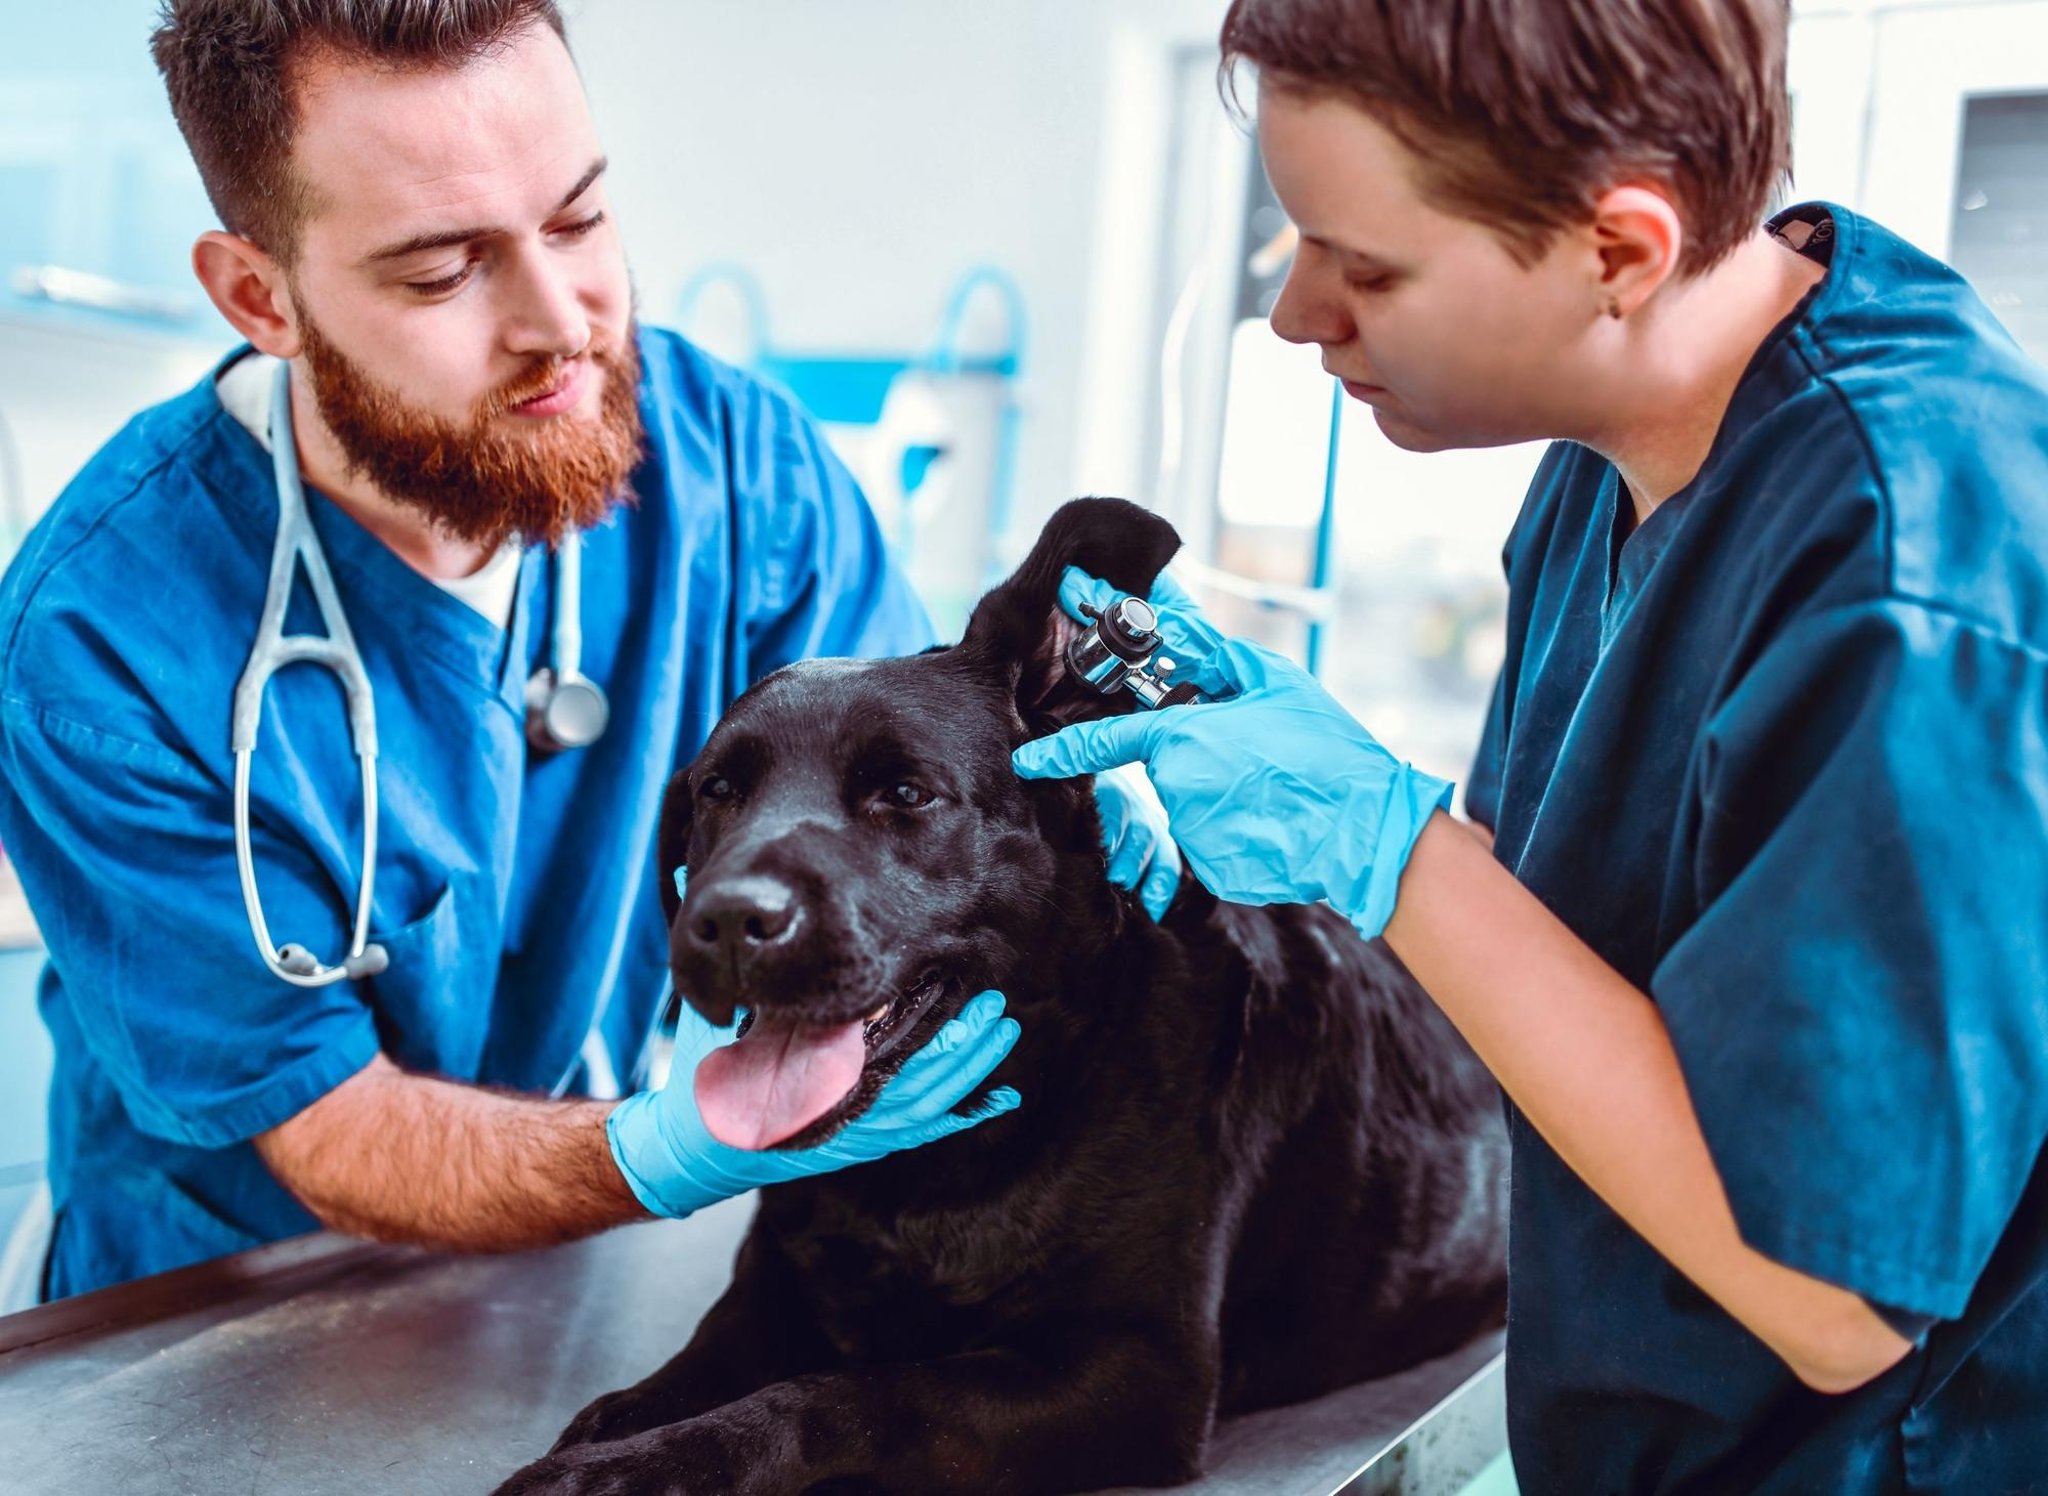 These are the 10 breeds of sickly dog likely to need frequent expensive vet visits – from the loving Labrador Retriever to the German Shepherd